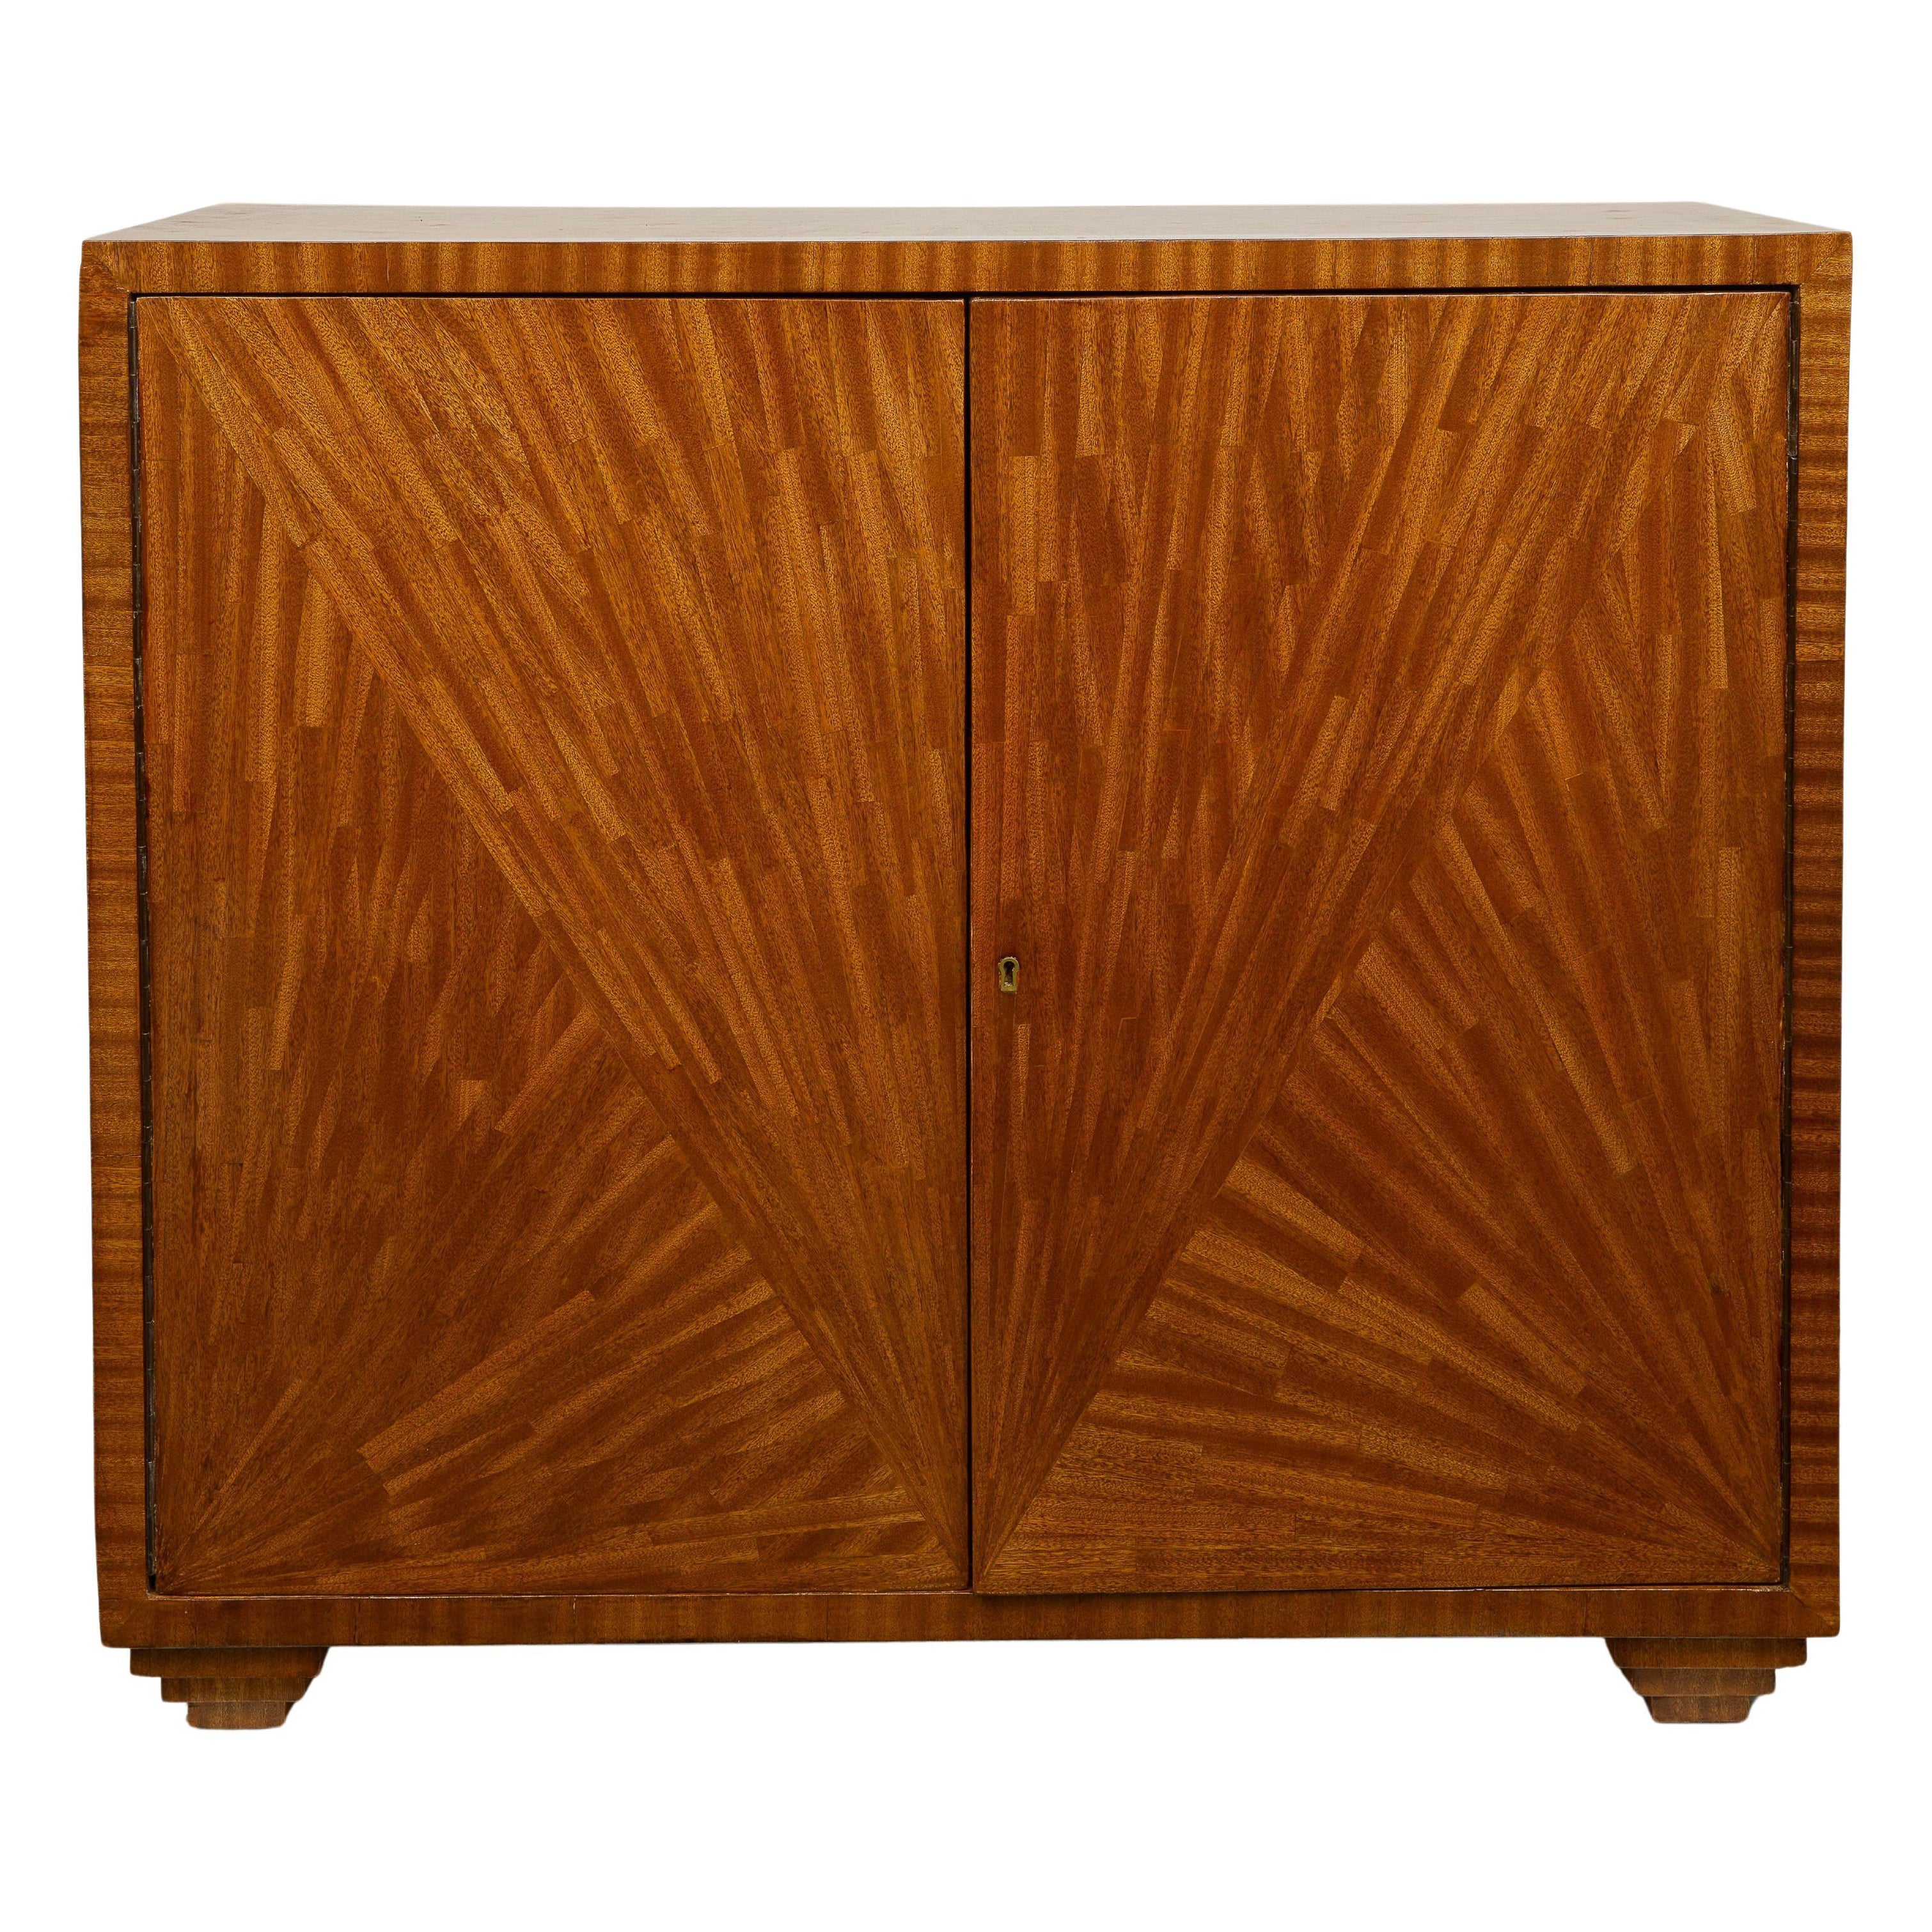 Jean-Michel Frank Inspired Exquisitely Crafted Parquetry Cabinet